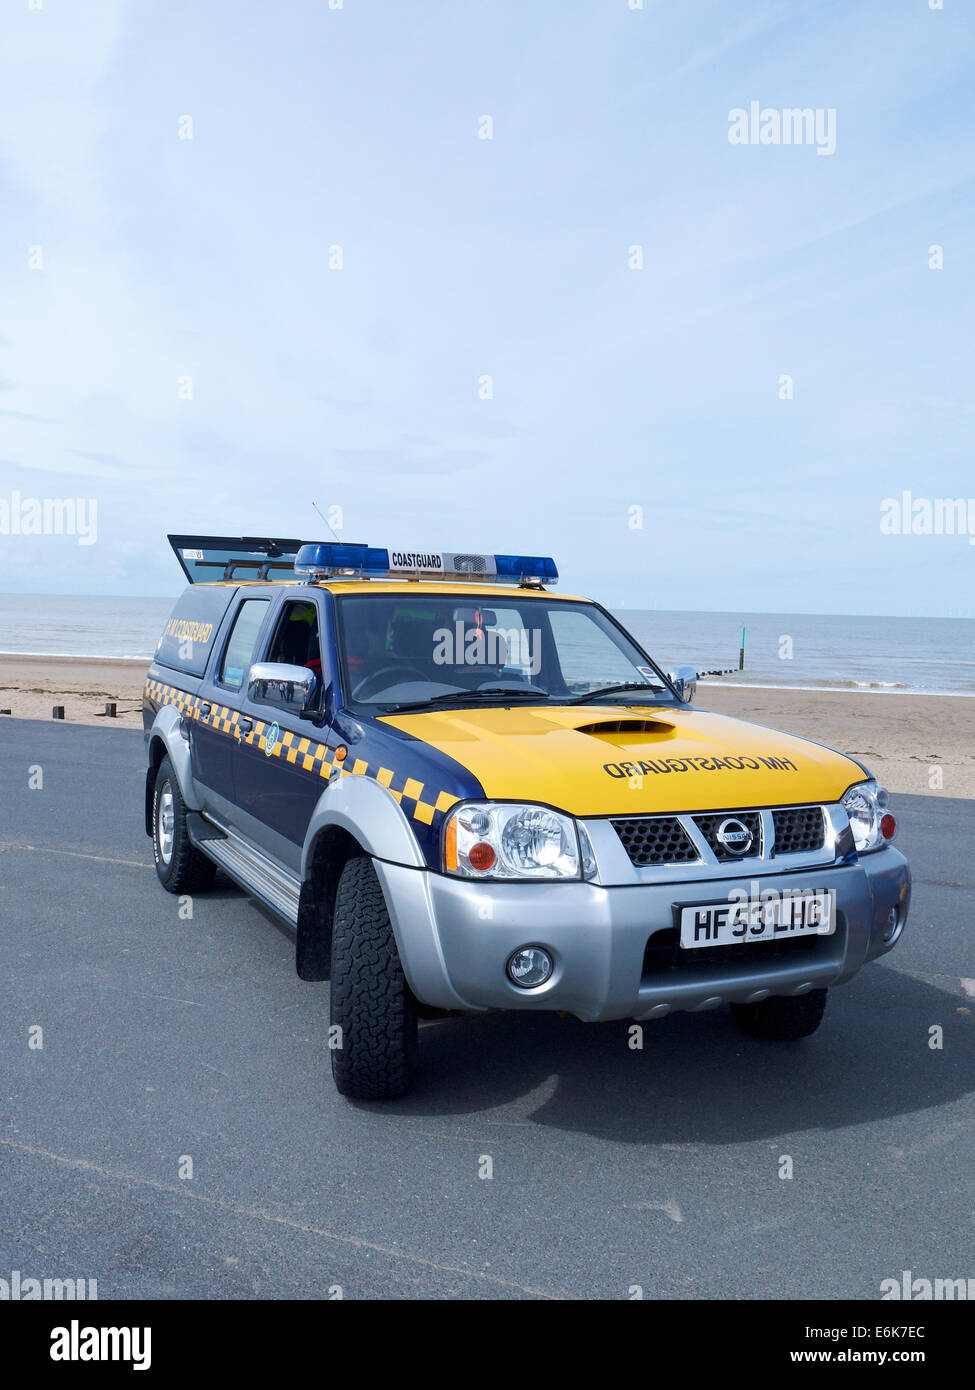 HM Coastguard search and rescue vehicle on the promenade in Rhyl Wales UK Stock Photo